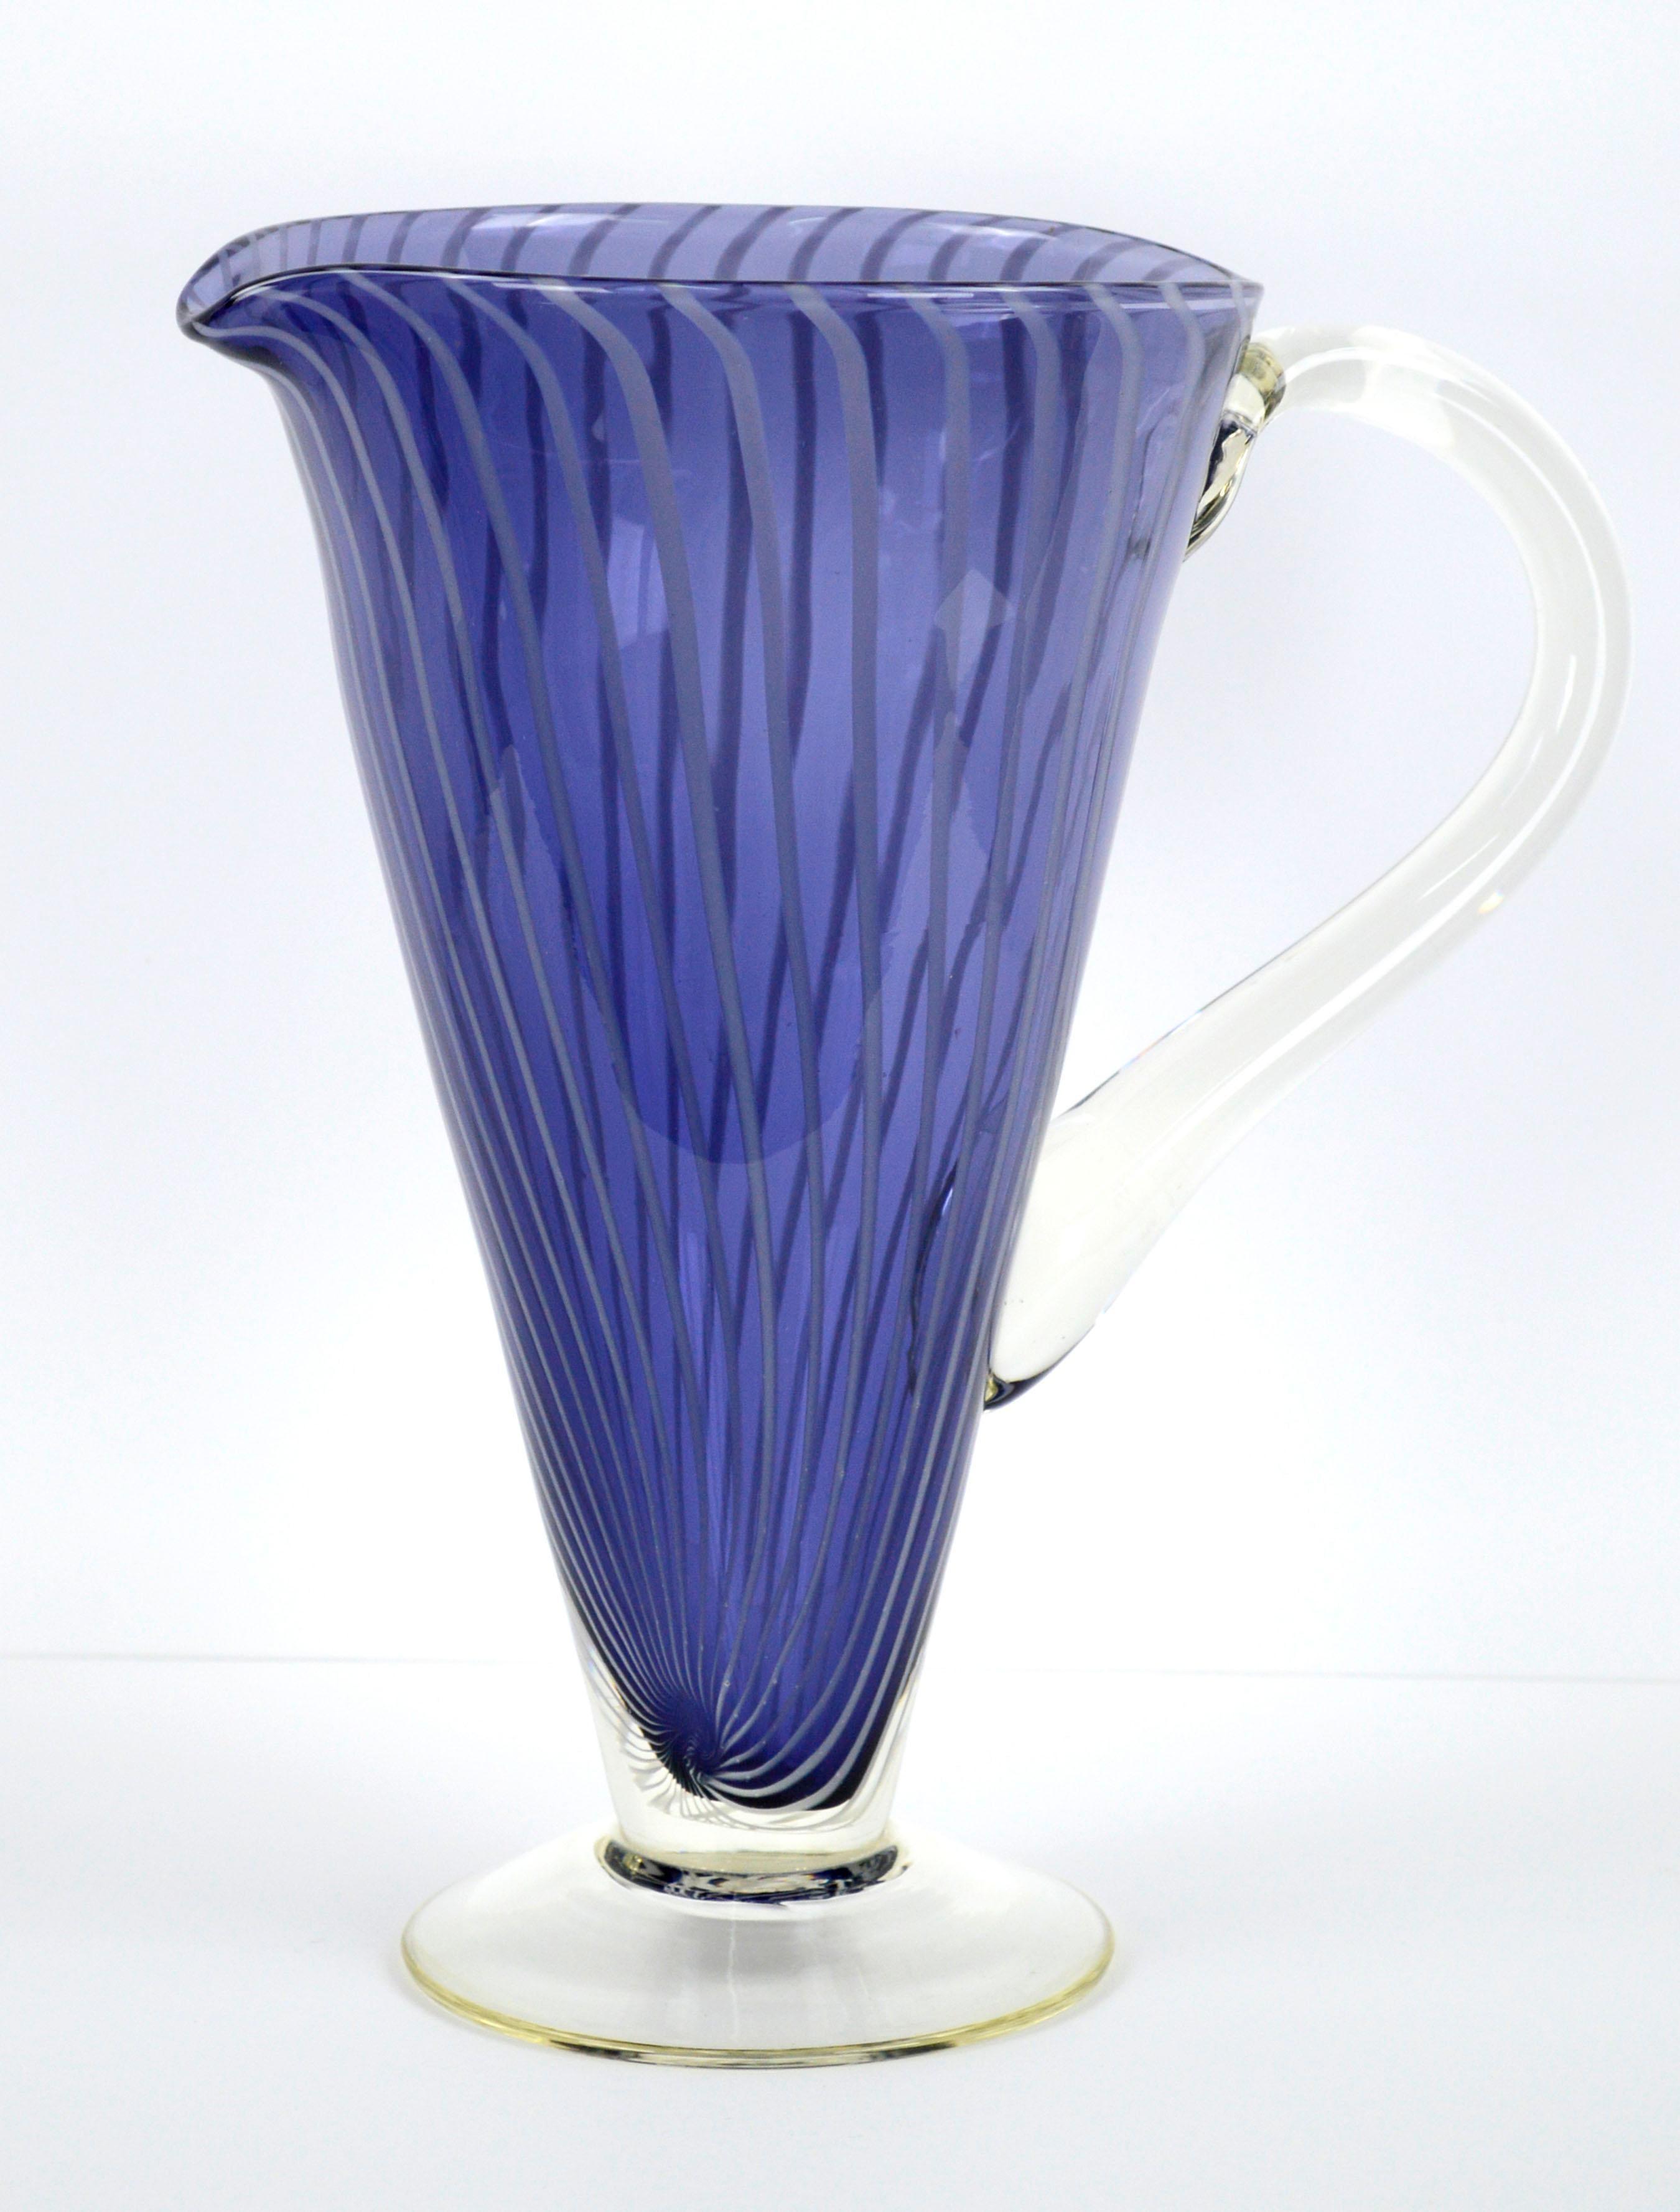 Mid-Century Modern cobalt blue and white striped filigrana Murano glass pitcher. 

Bold cobalt blue with subtle white vertical stripes that twist organically towards the base give this piece a hand crafted touch. Perfect for a contemporary urban,